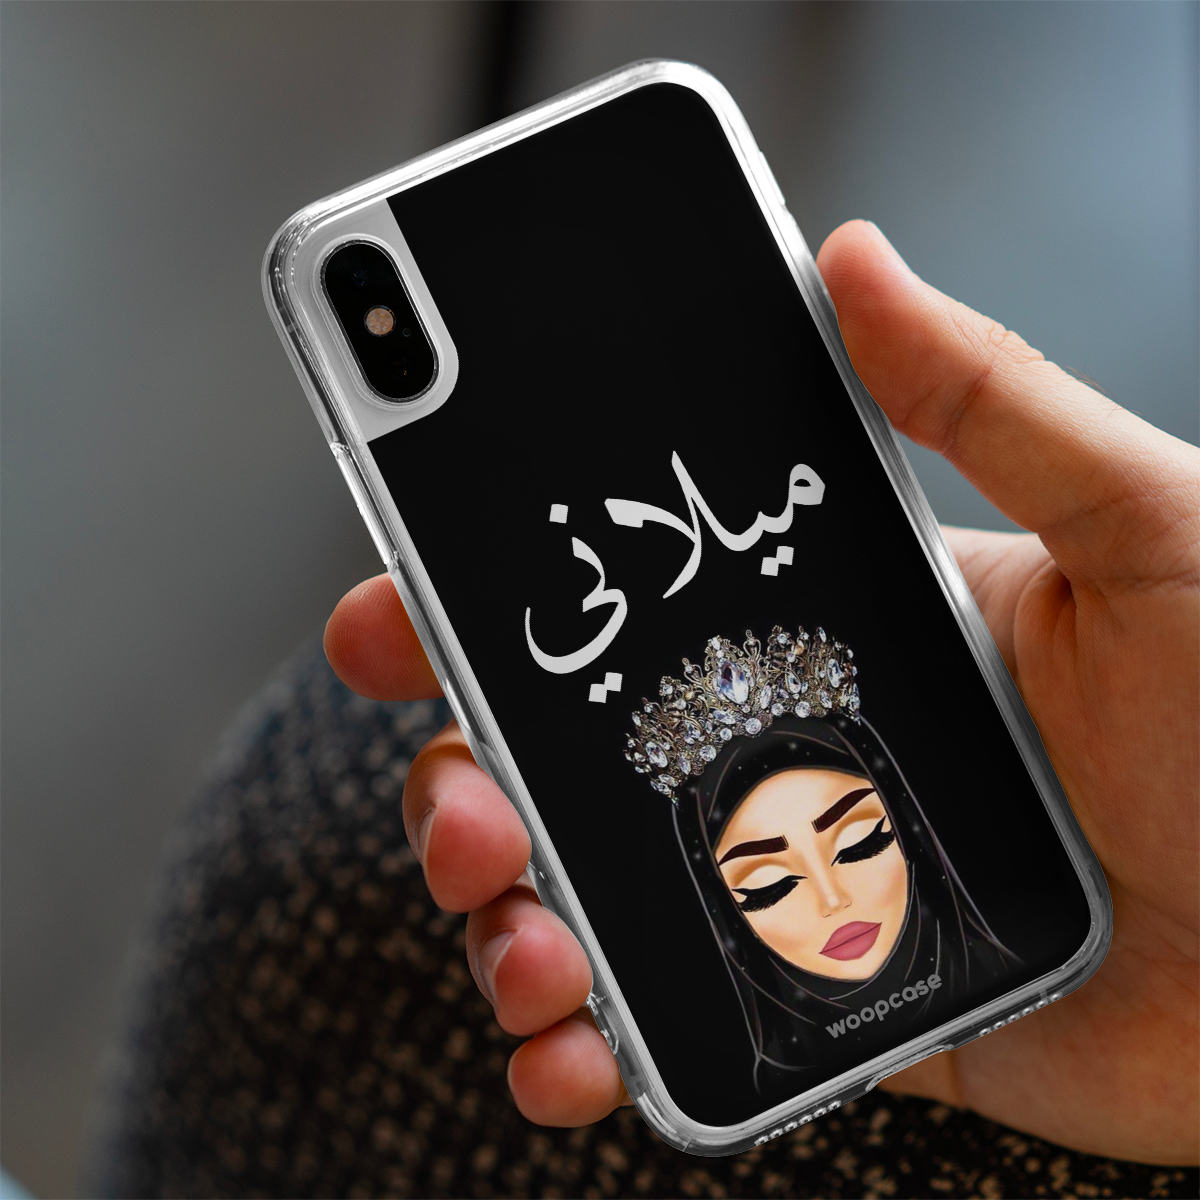 Face - Text in Arabic Phone case